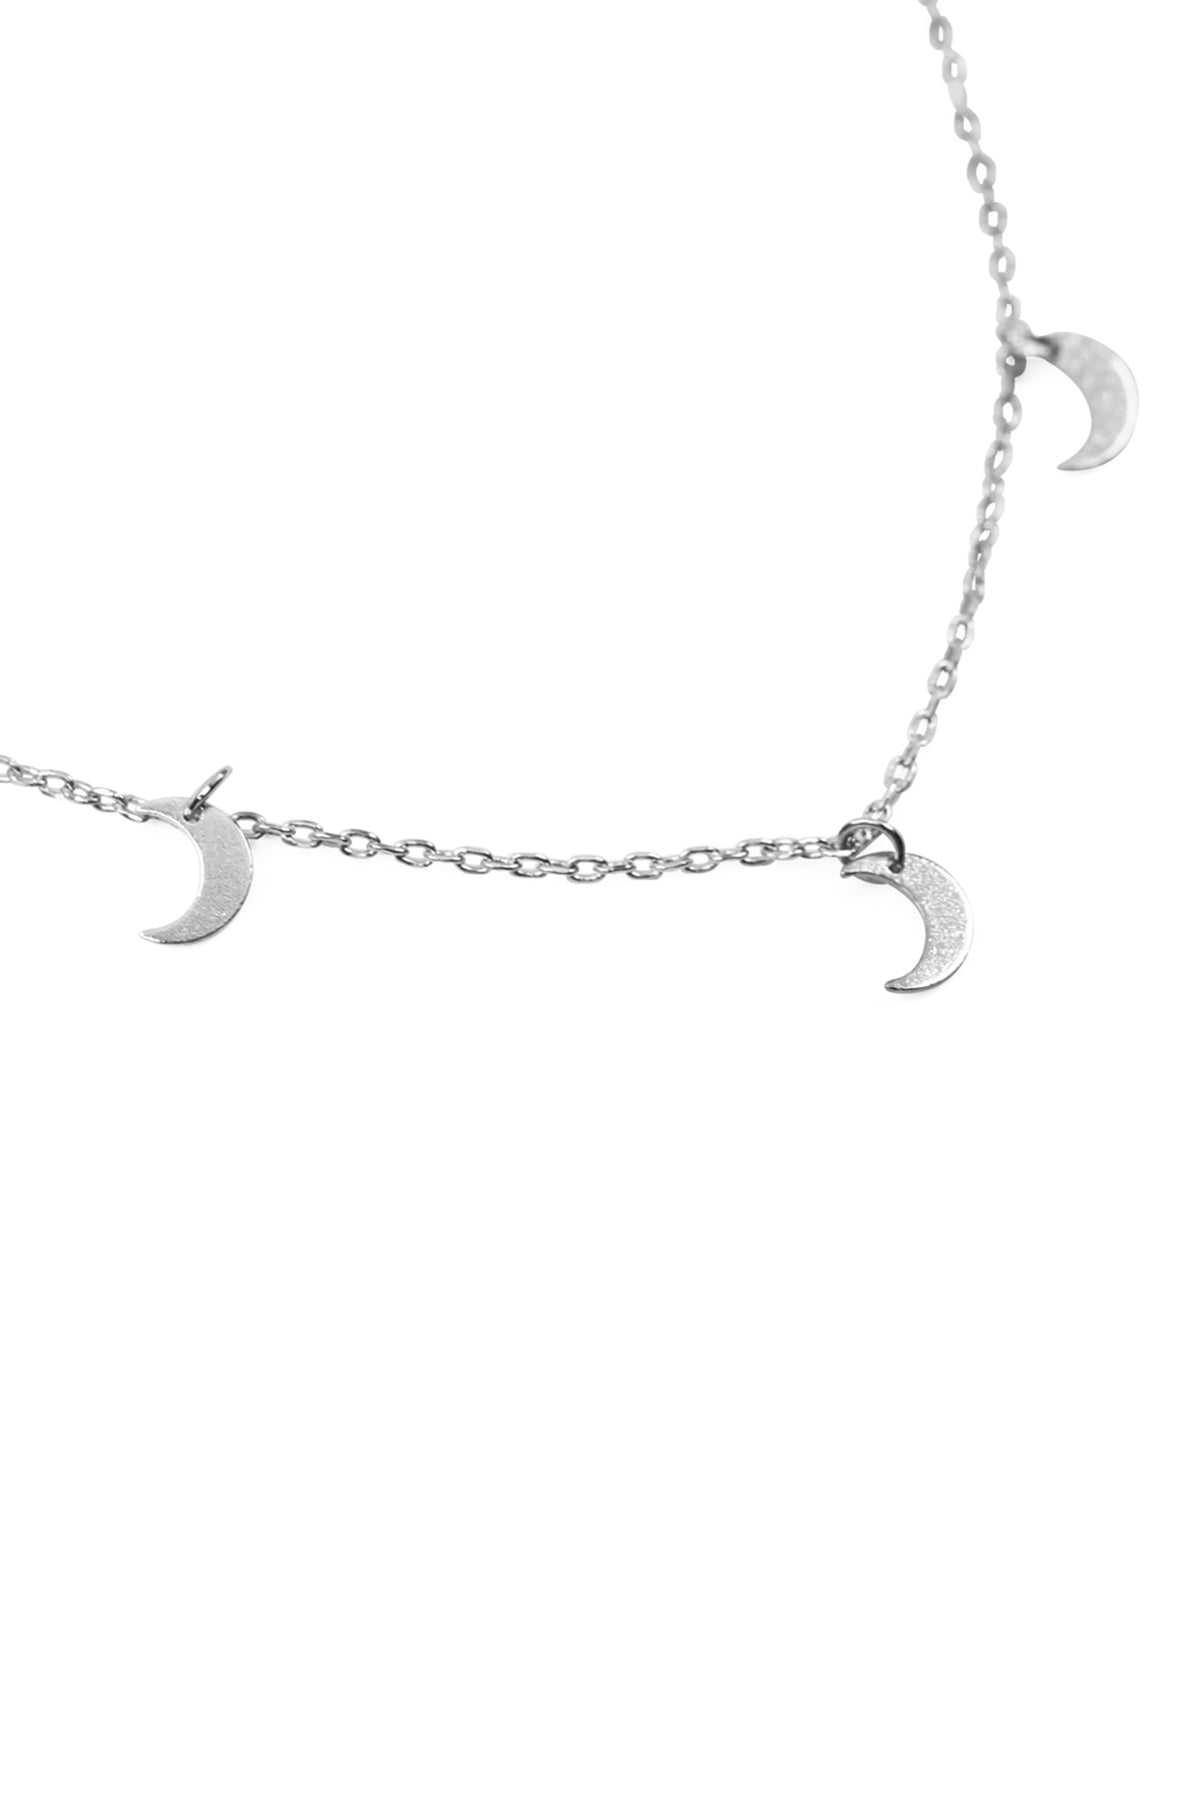 5 DAINTY SMALL MOON NECKLACE